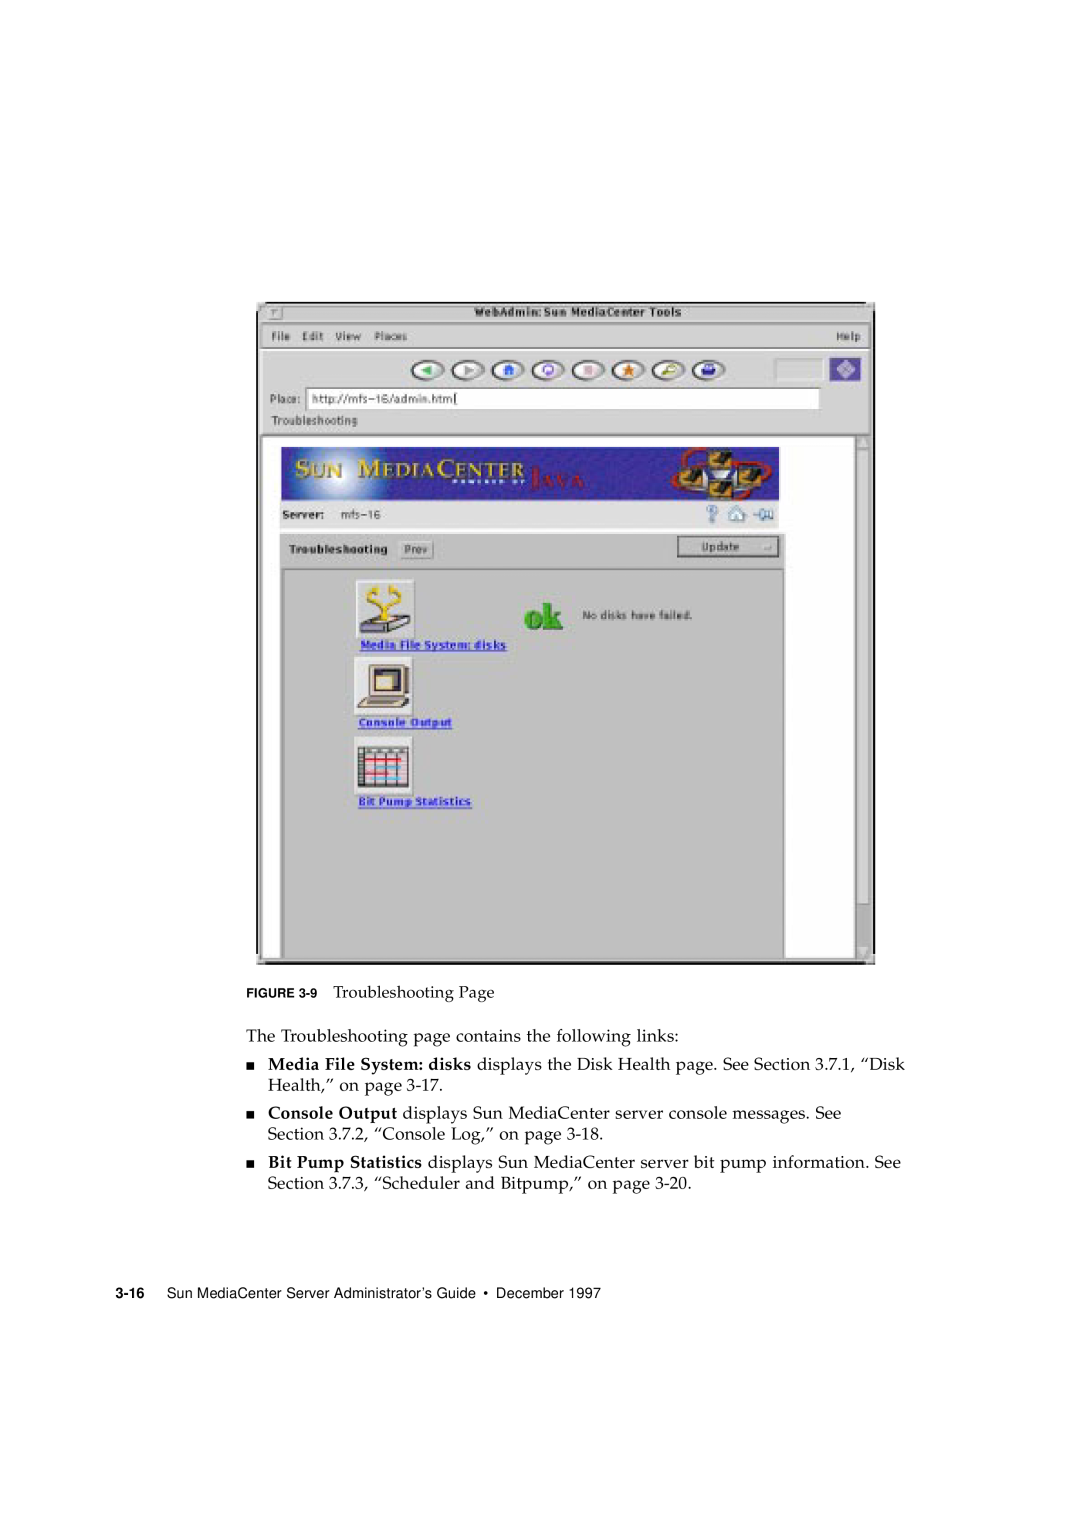 Sun Microsystems 2.1 manual The Troubleshooting page contains the following links 